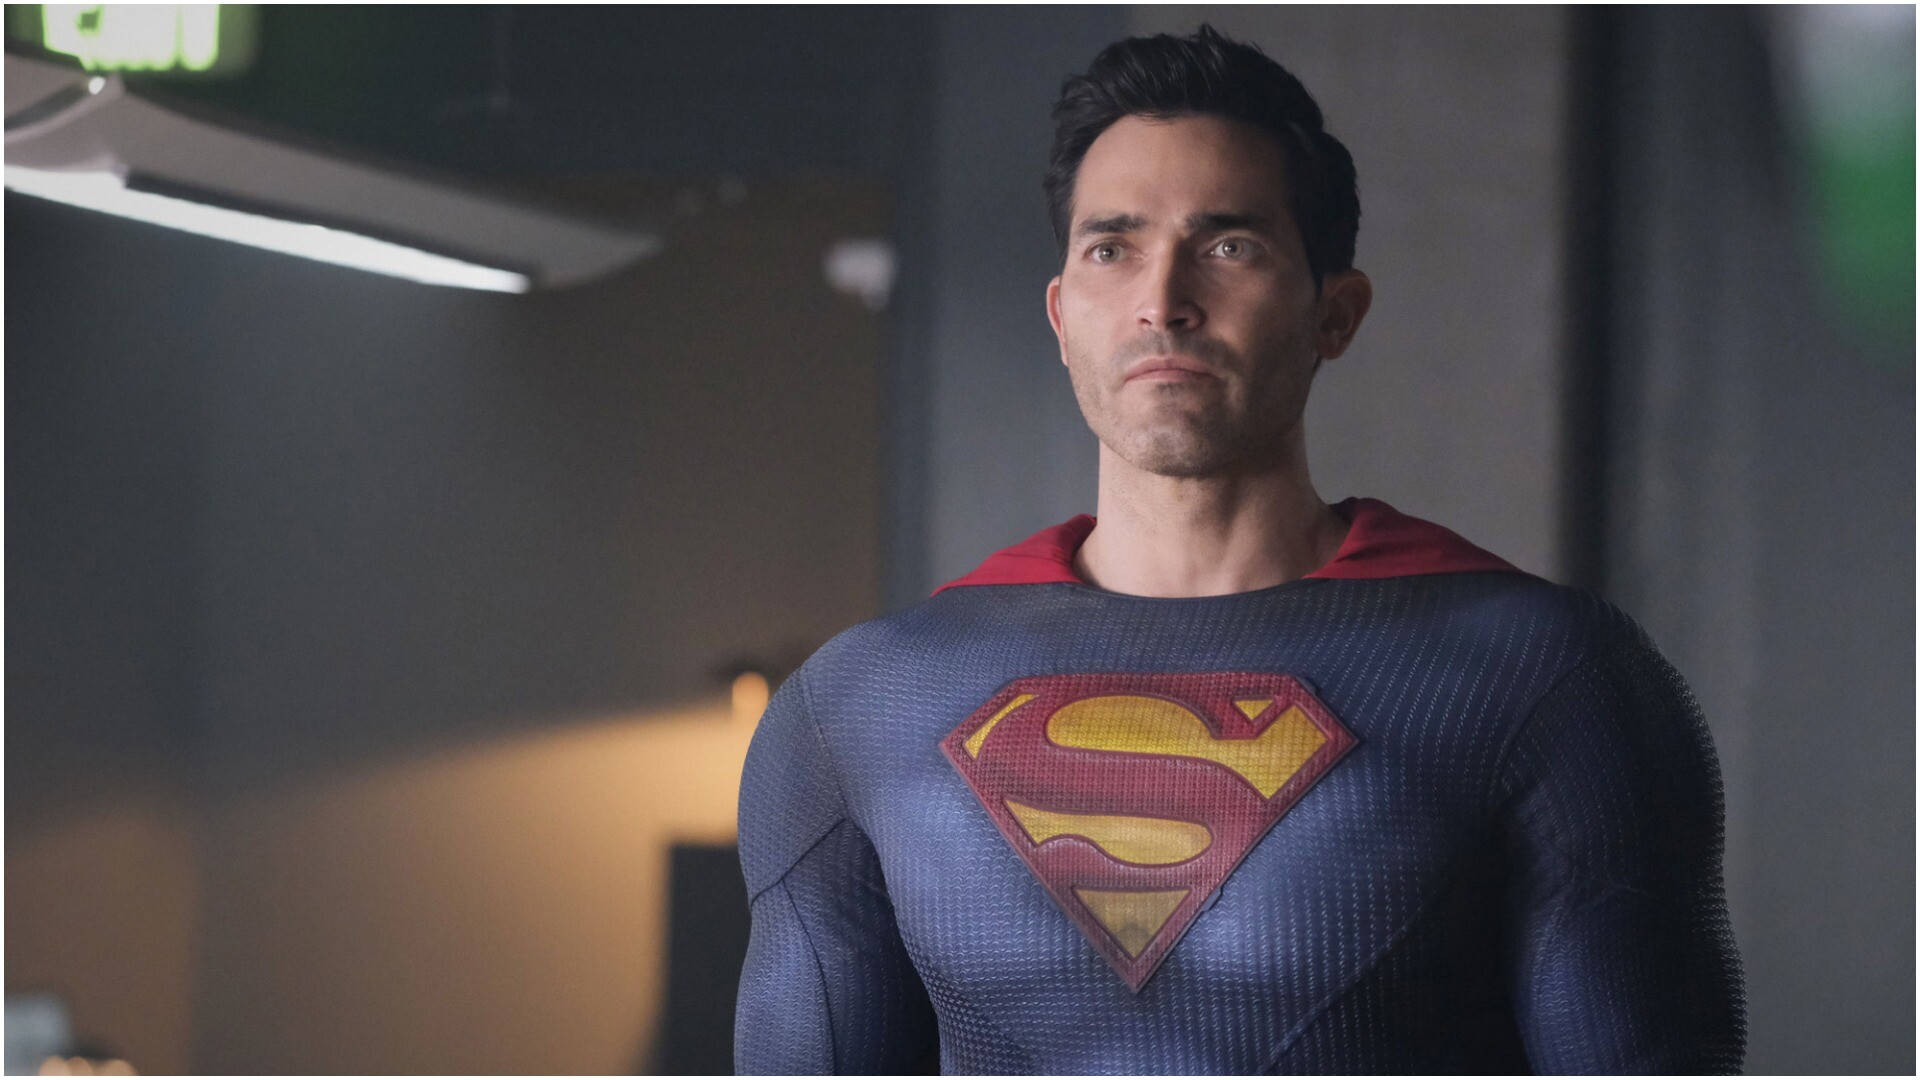 Superman and Lois (TV Series): Clark Kent, had been portrayed by Tyler Hoechlin in the Arrowverse since 2016. 1920x1080 Full HD Background.